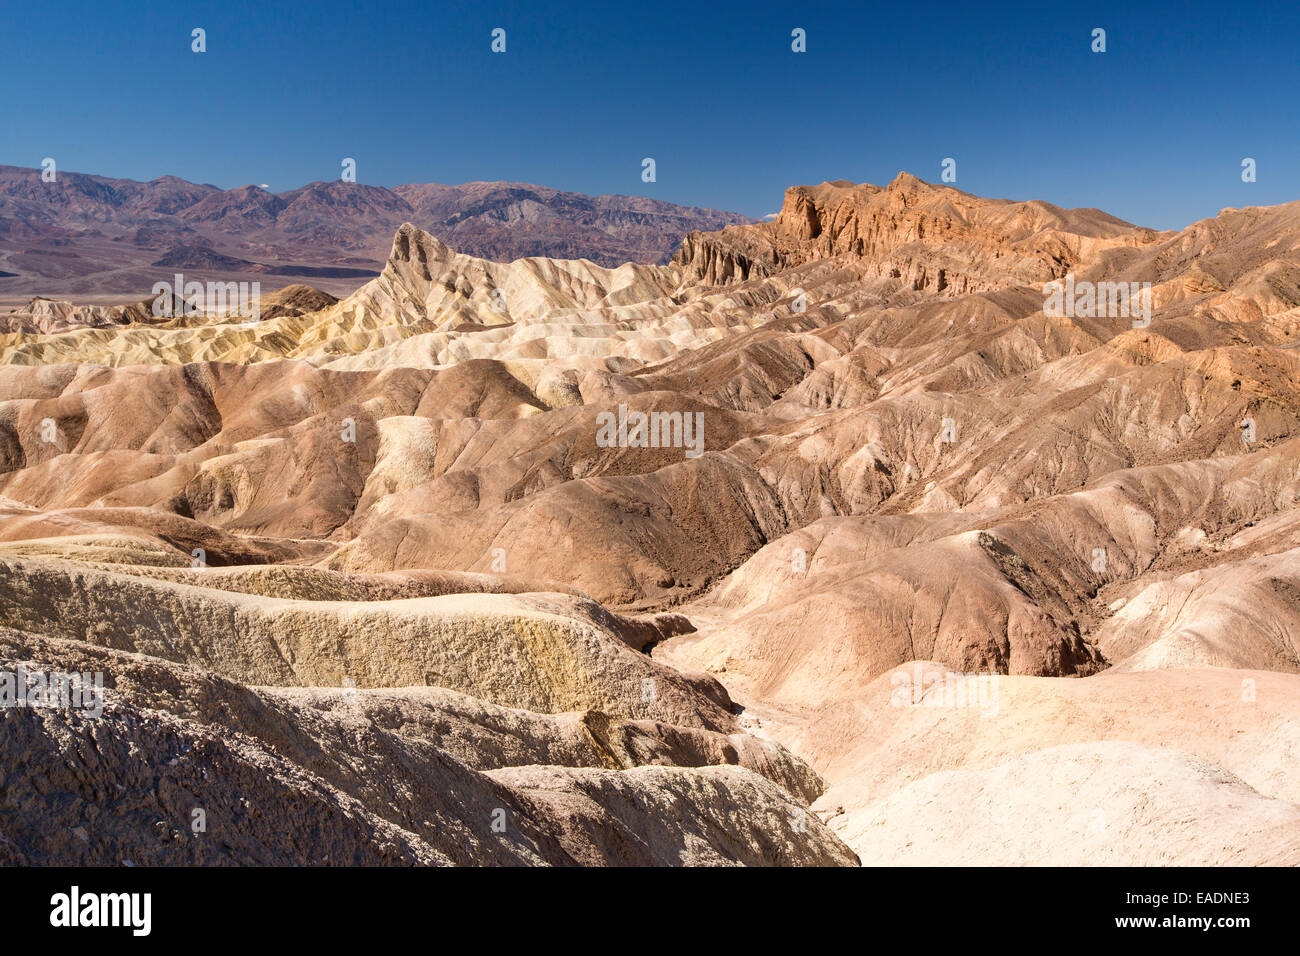 Badland scenery at Zabriskie Point in Death Valley which is the lowest, hottest, driest place in the USA, with an average annual rainfall of around 2 inches, some years it does not receive any rain at all. Stock Photo